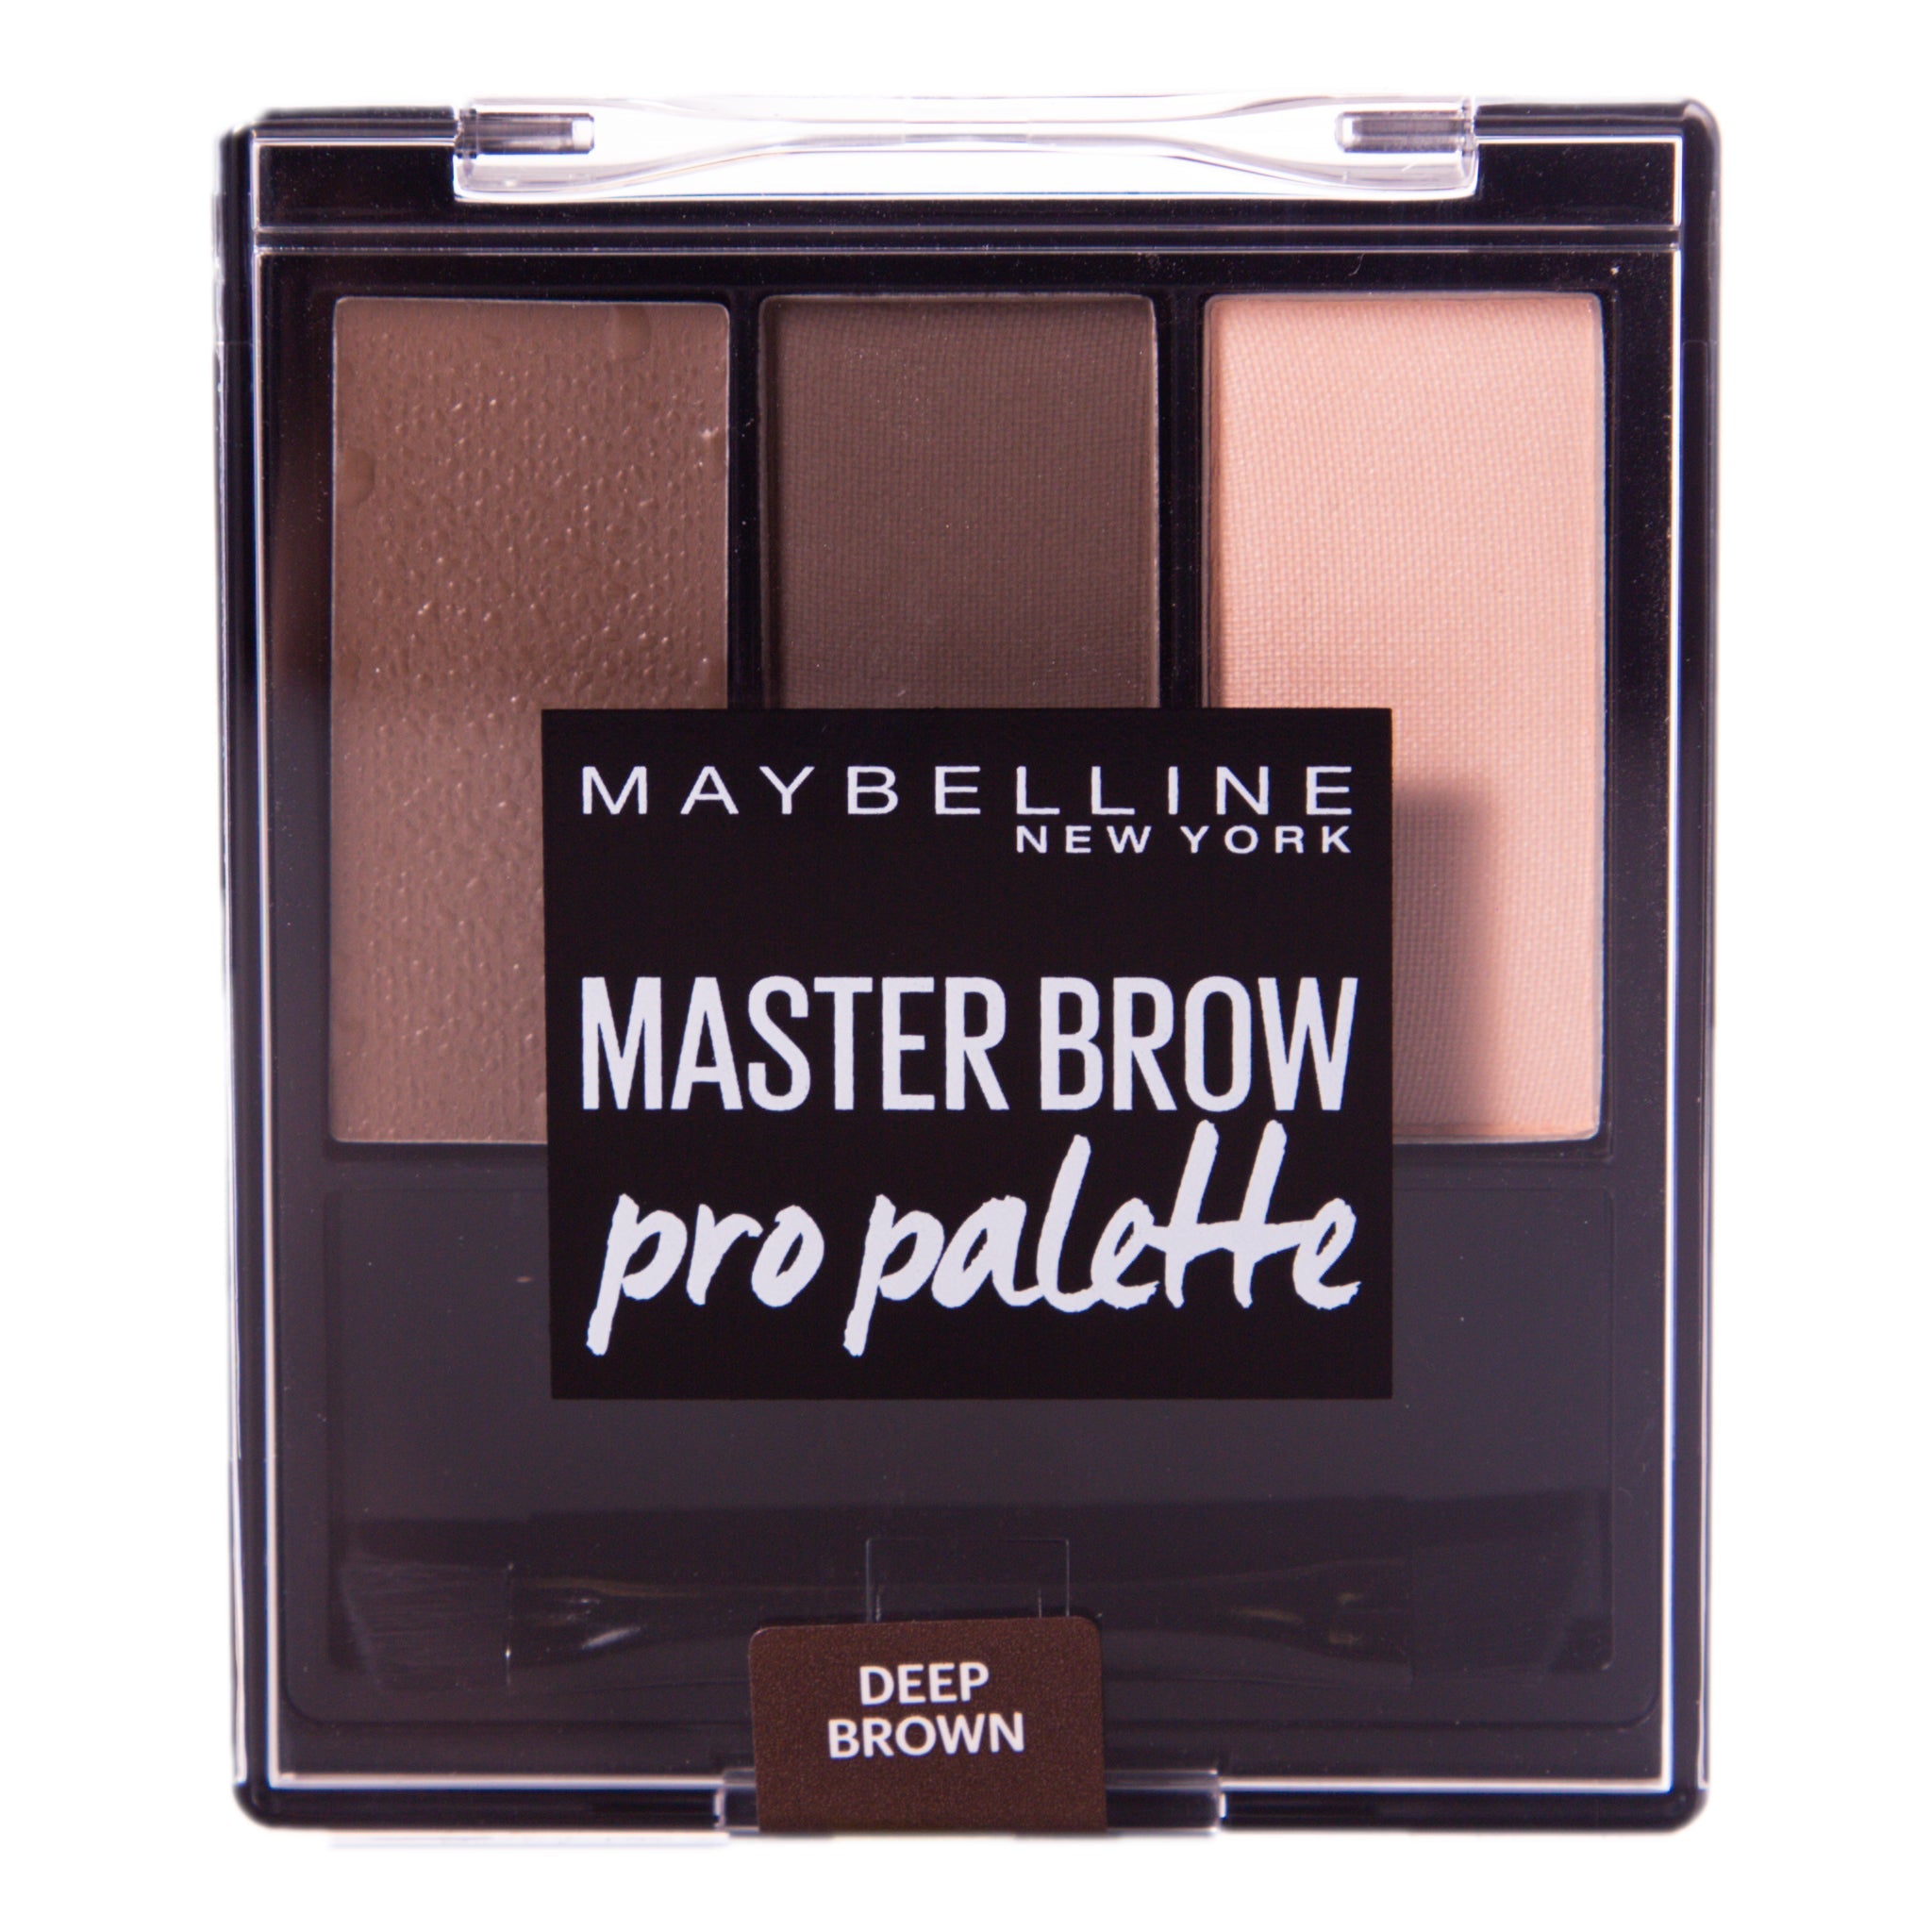 Maybelline Master Brow Pro Palette - Deep Brown